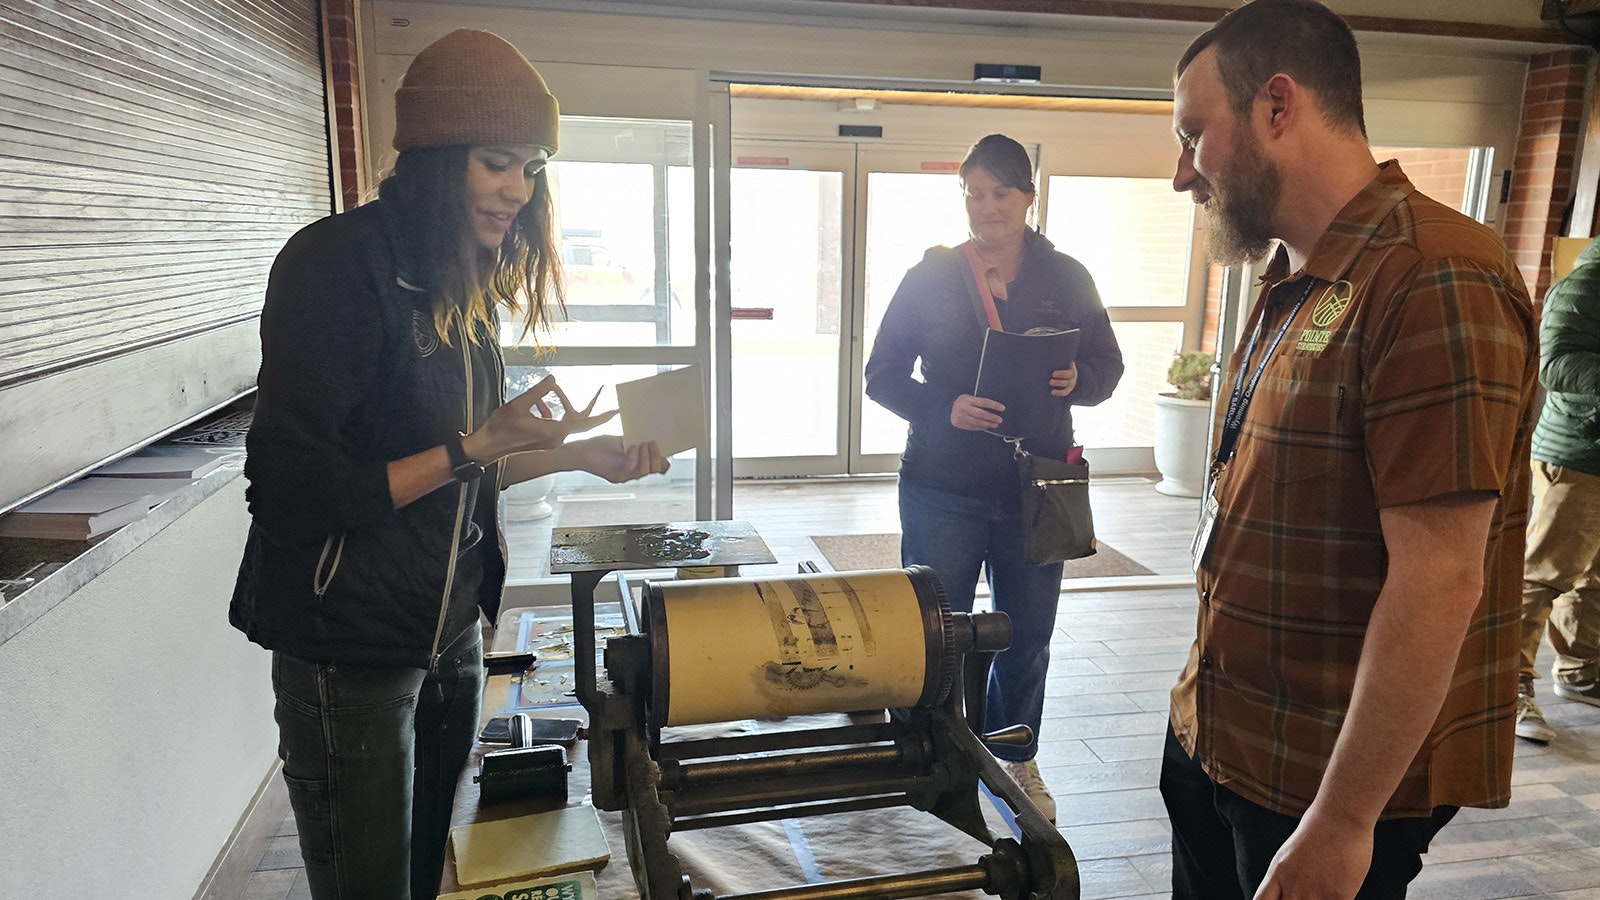 Kayla Clark explains how her 125-year-old printing press Poco works to a participant at the Worth Outdoor Tourism Summit in Casper. The press is something she picked up from a poet as a "portable" option for events. It weighs 250 pounds.